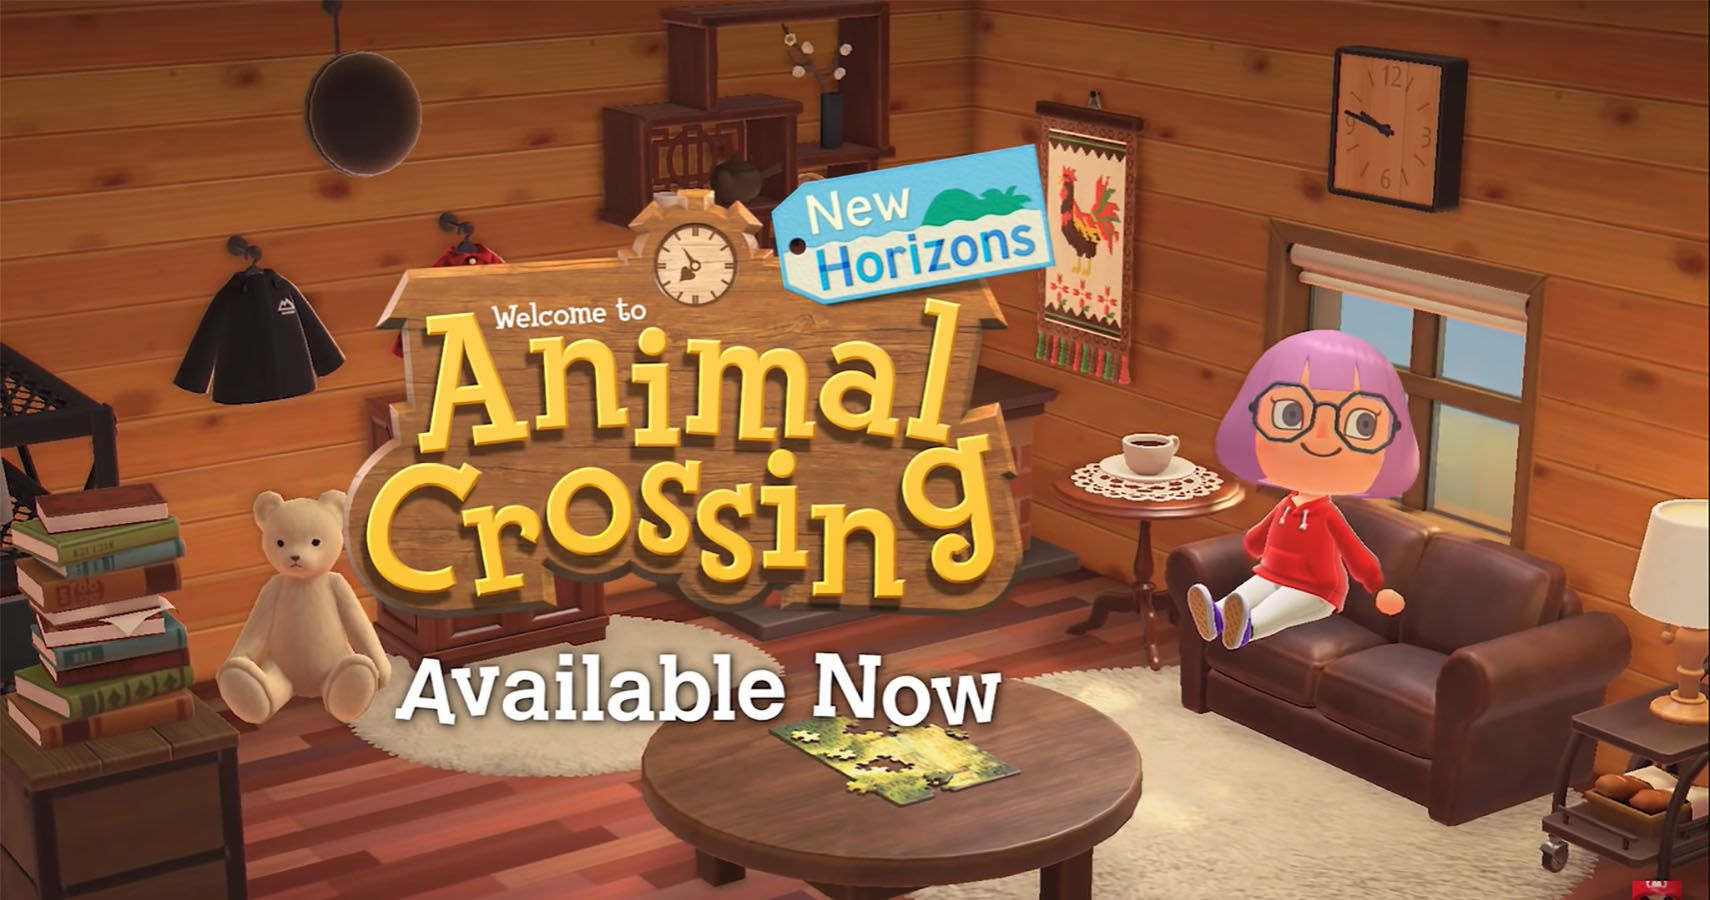 Screenshot of promotional video for Animal Crossings New Horizons